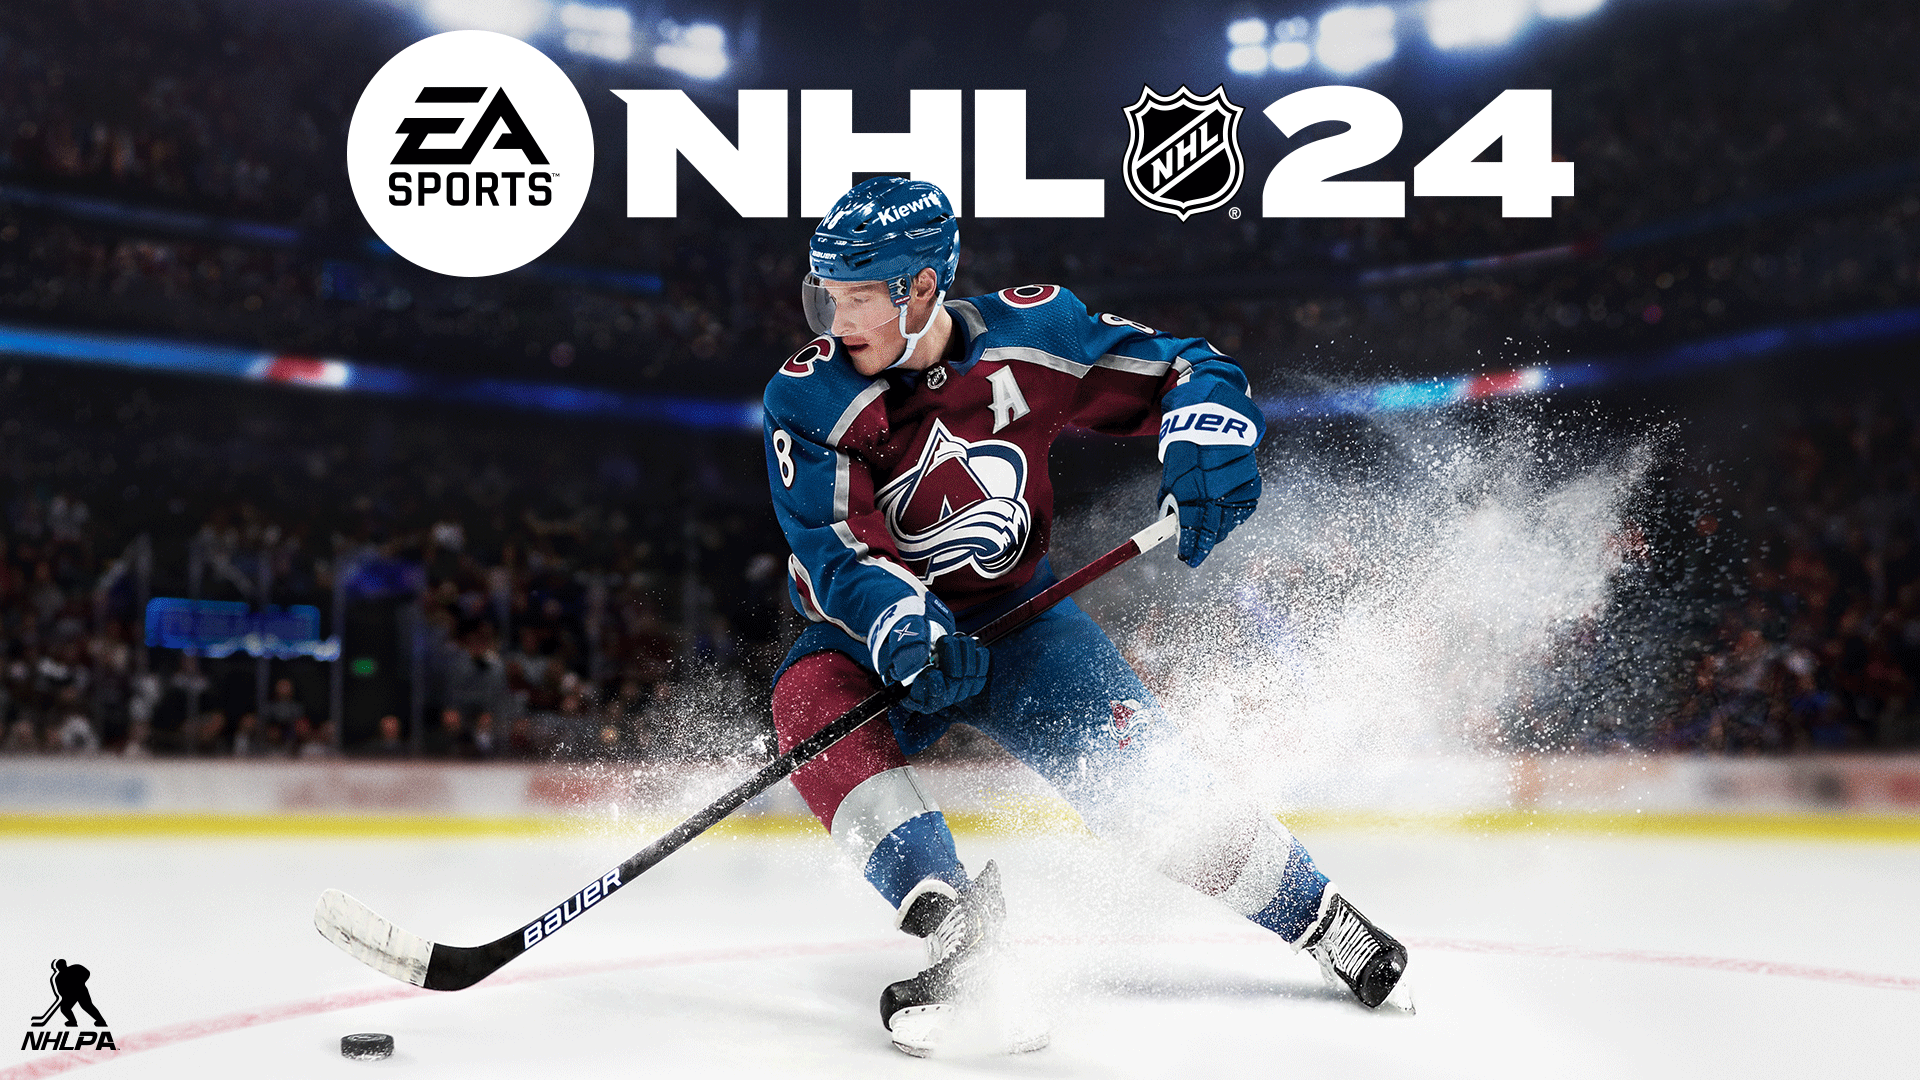 NHL 24 Cover is Athlete Cale Makar - Operation Sports